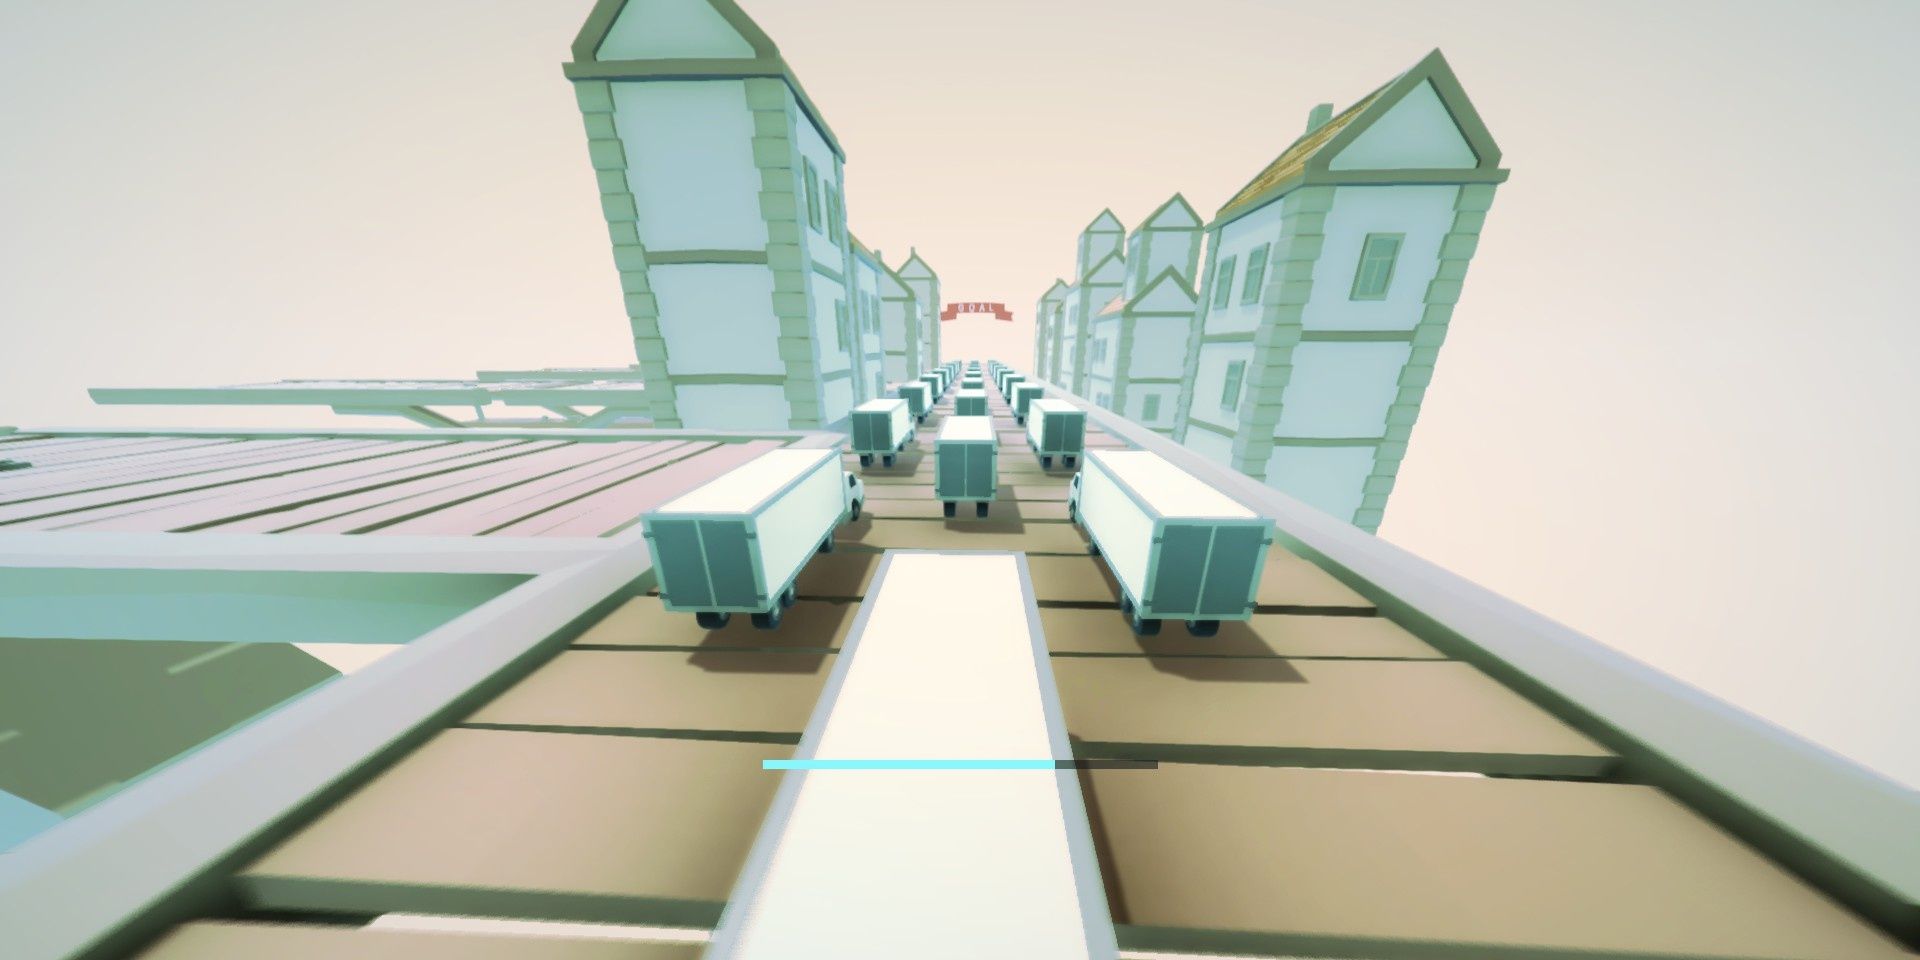 A Steampunk level where time has slowed down in Clustertruck